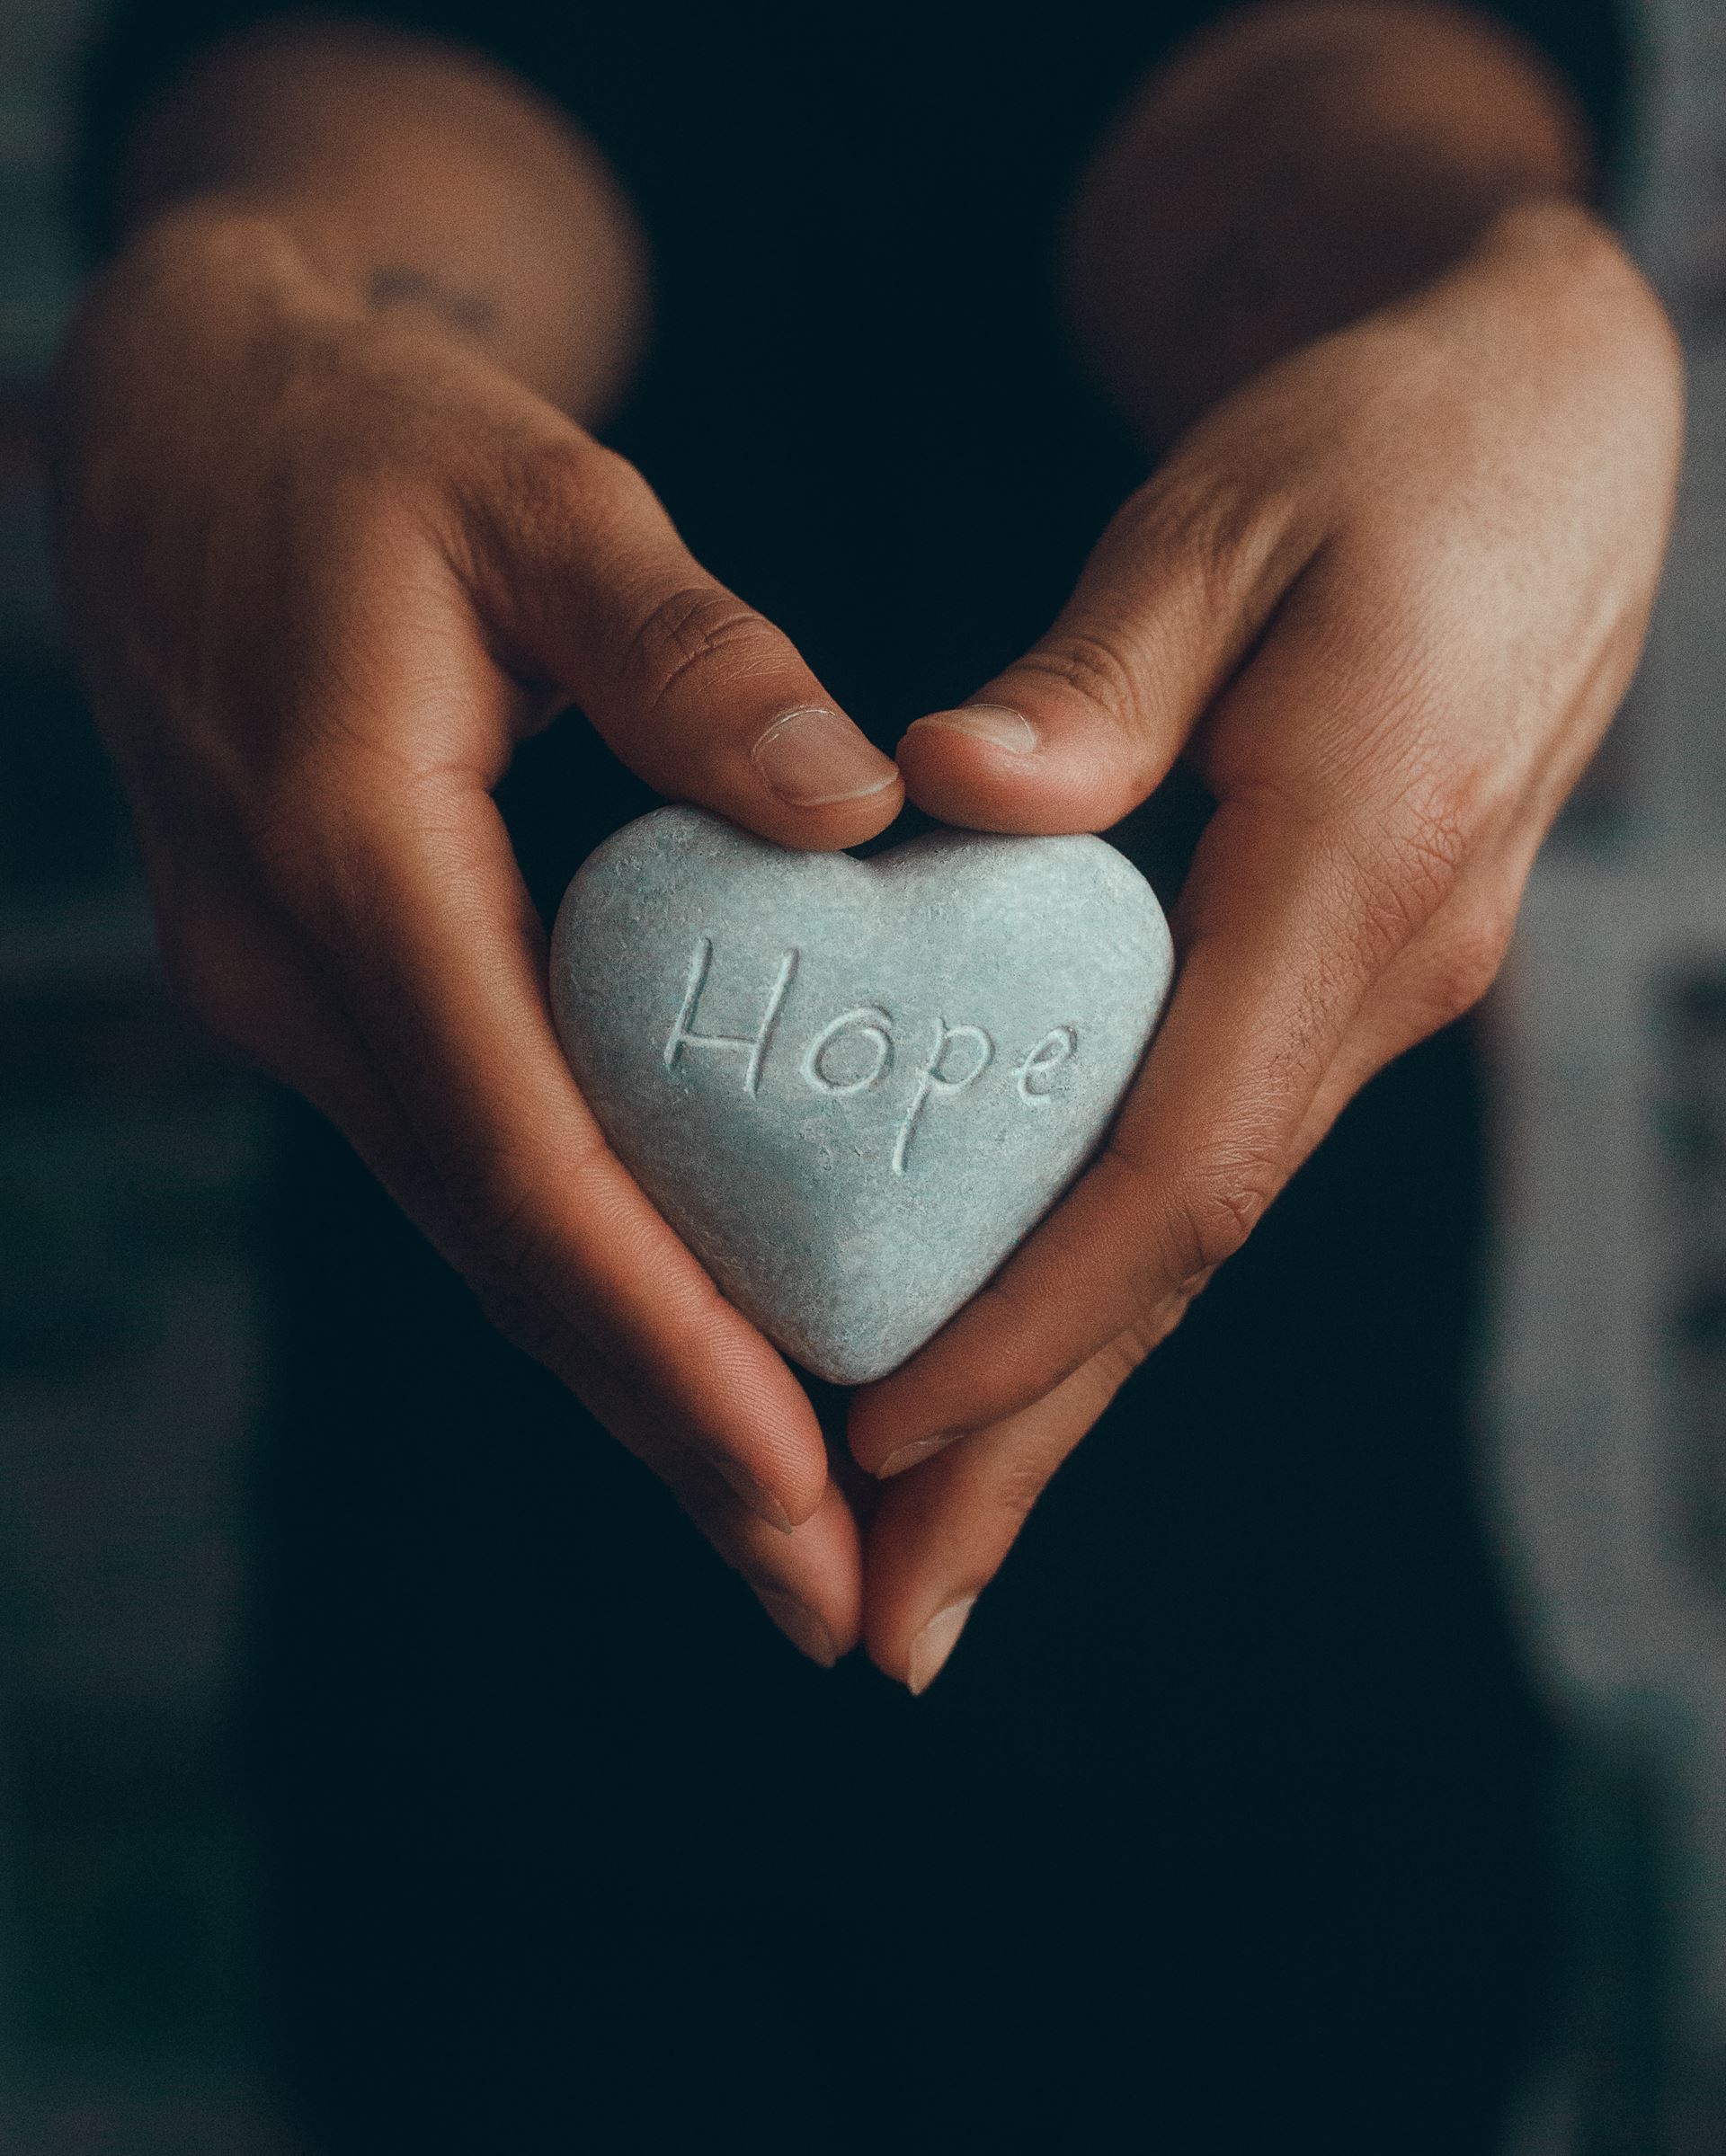 A stone with the word HOPE